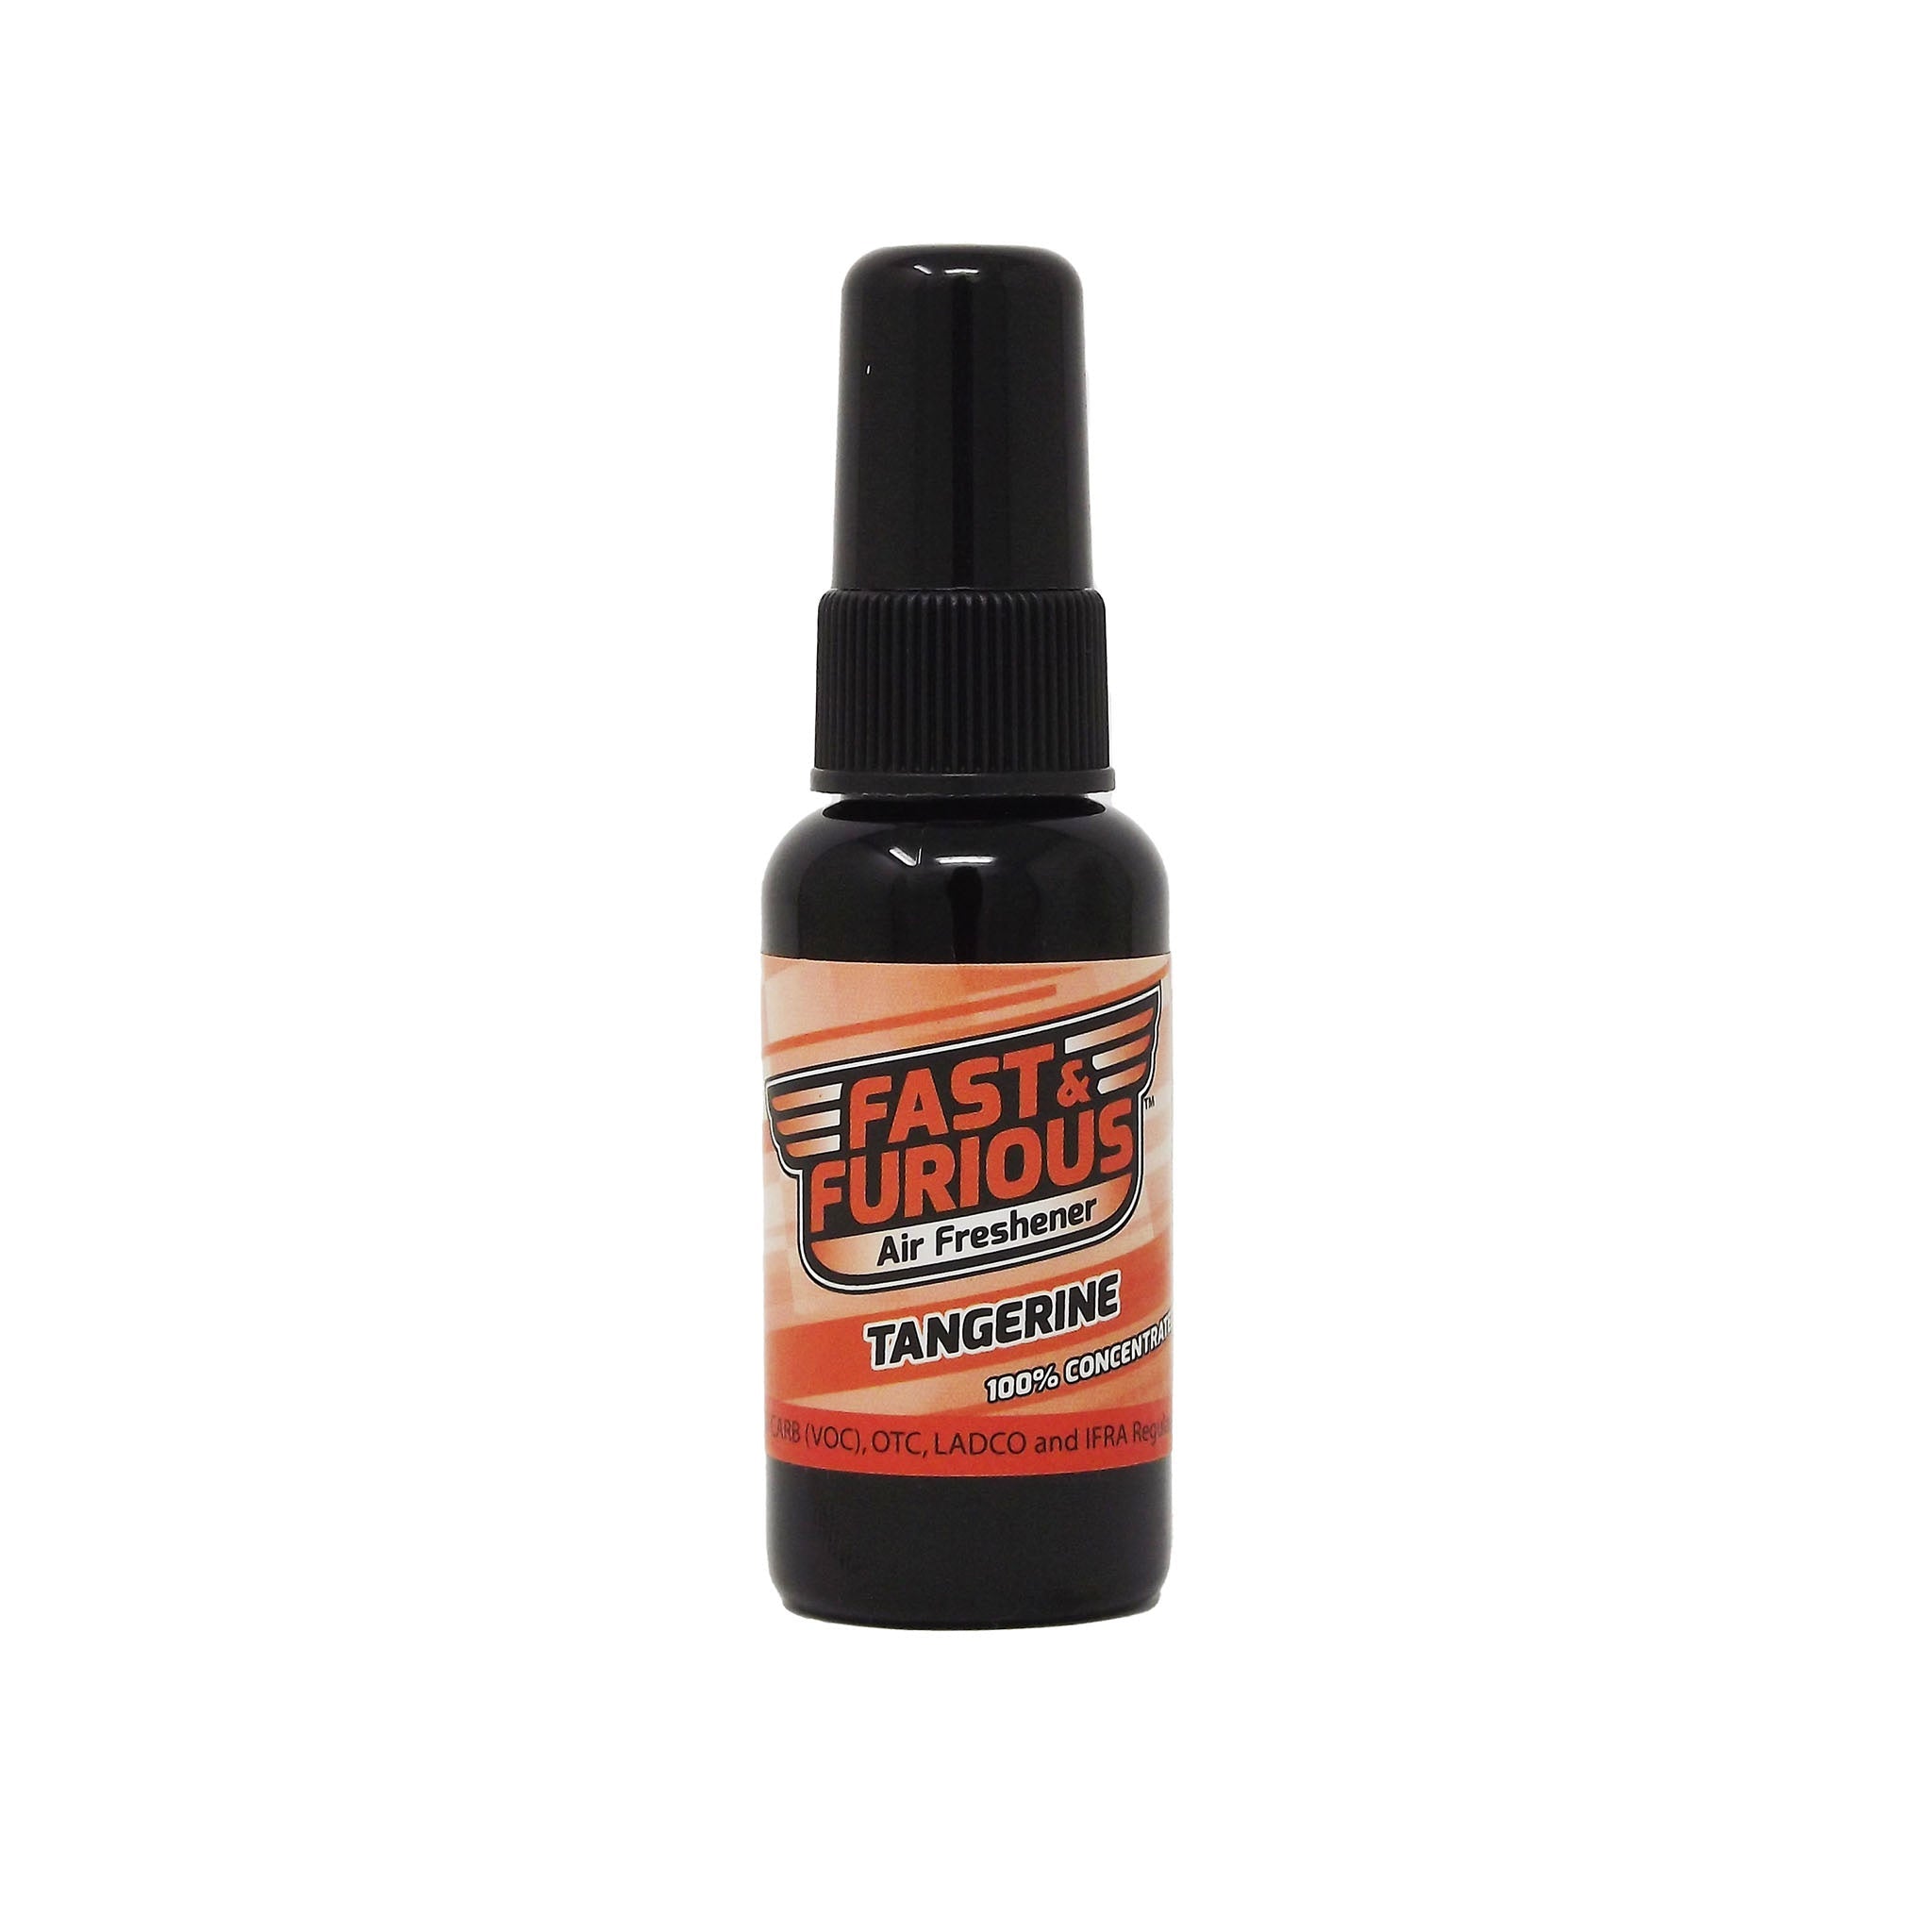 Fast and Furious Air Freshener - Tangerine Scent Size: 1.5oz